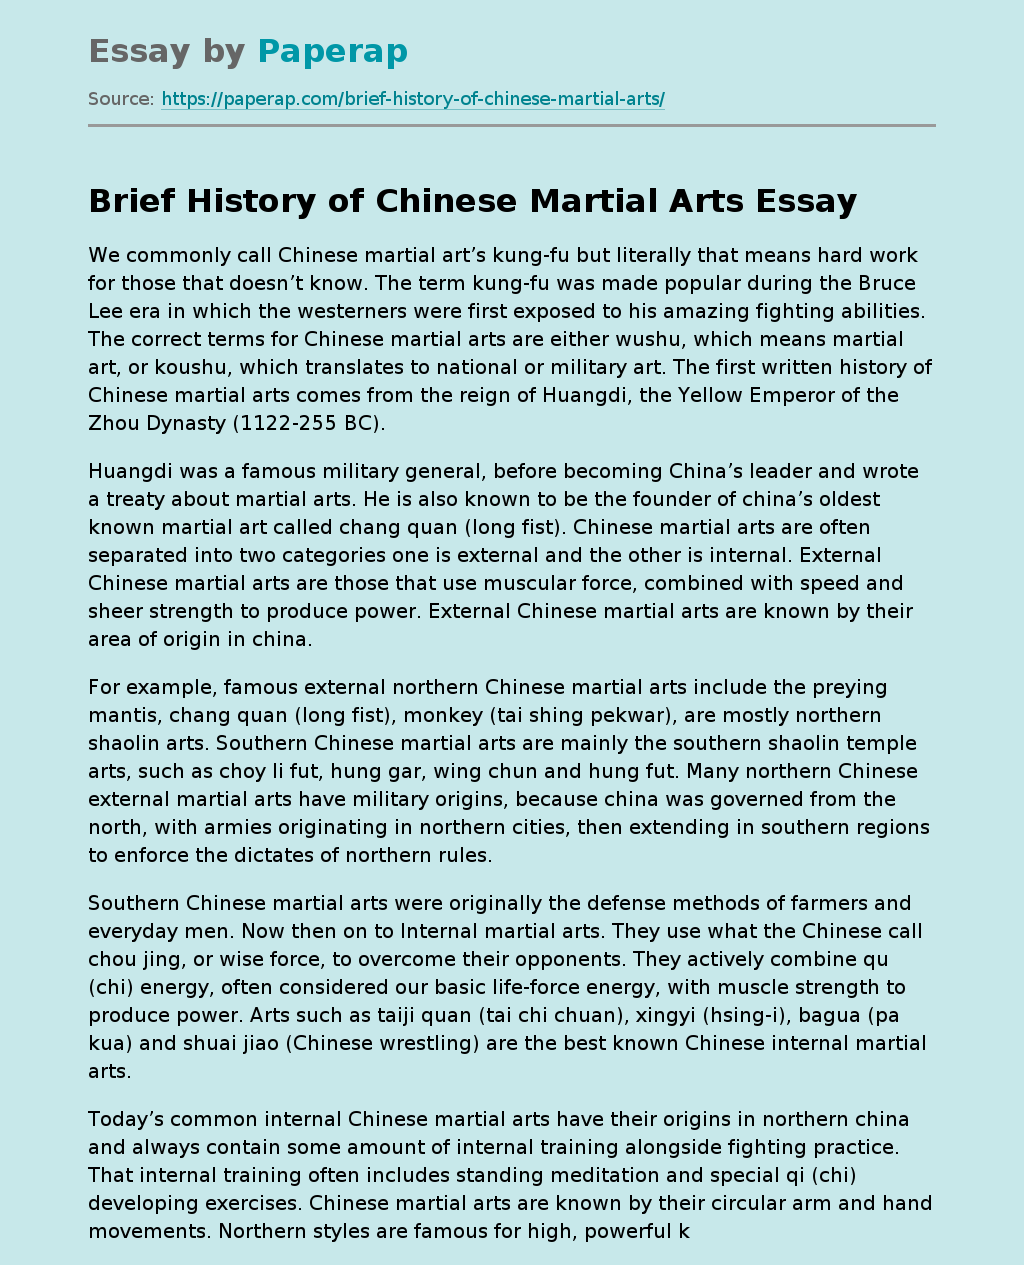 Brief History of Chinese Martial Arts